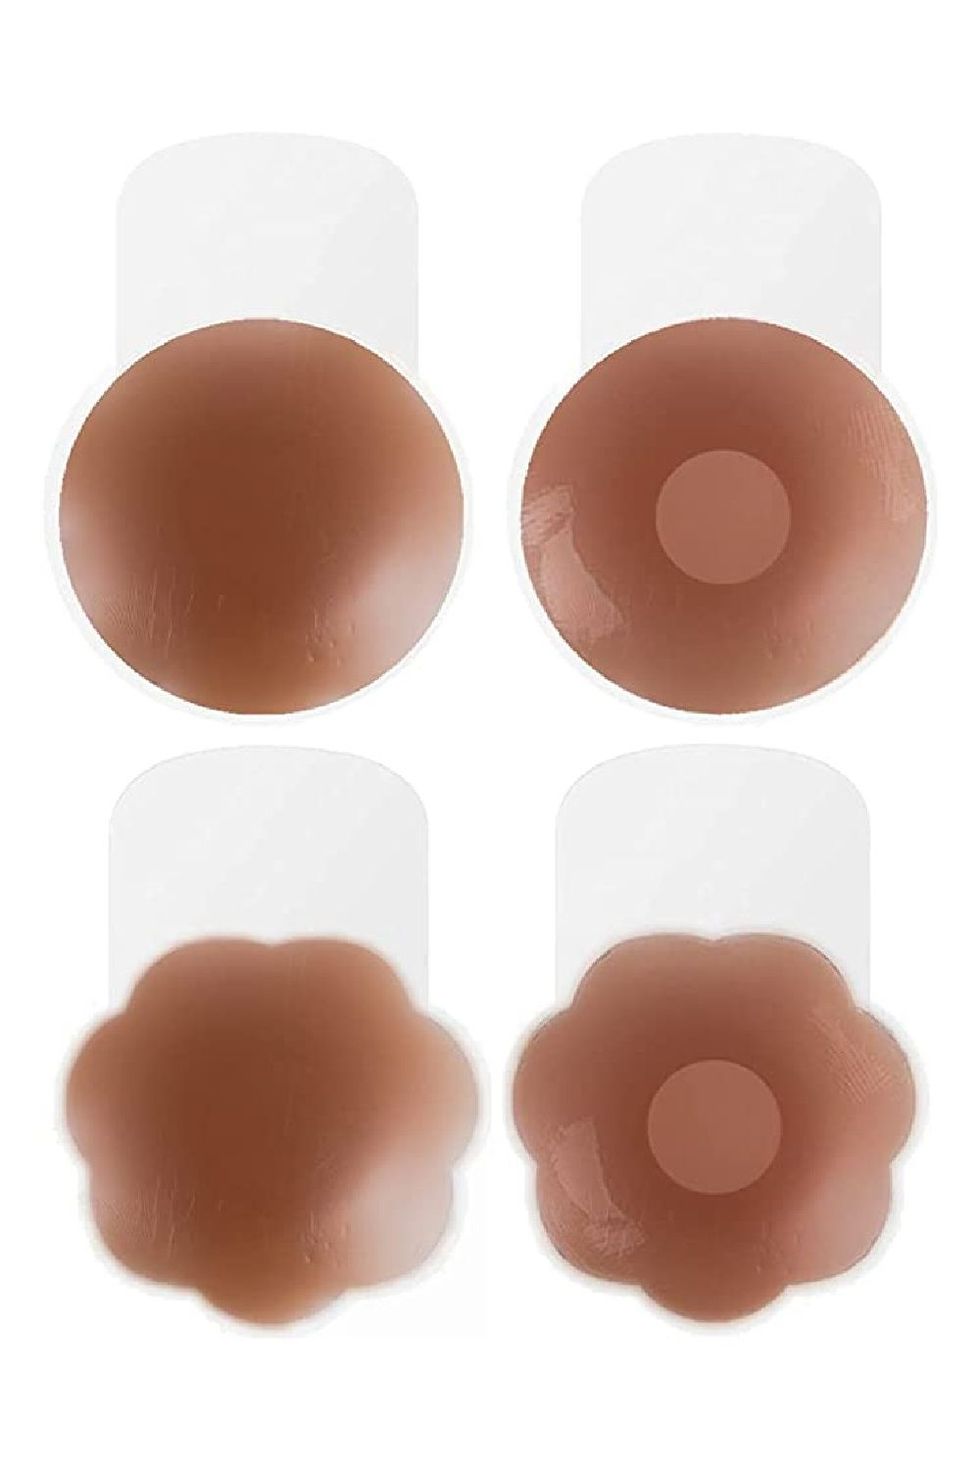 Silicone Lifting Nipple Covers